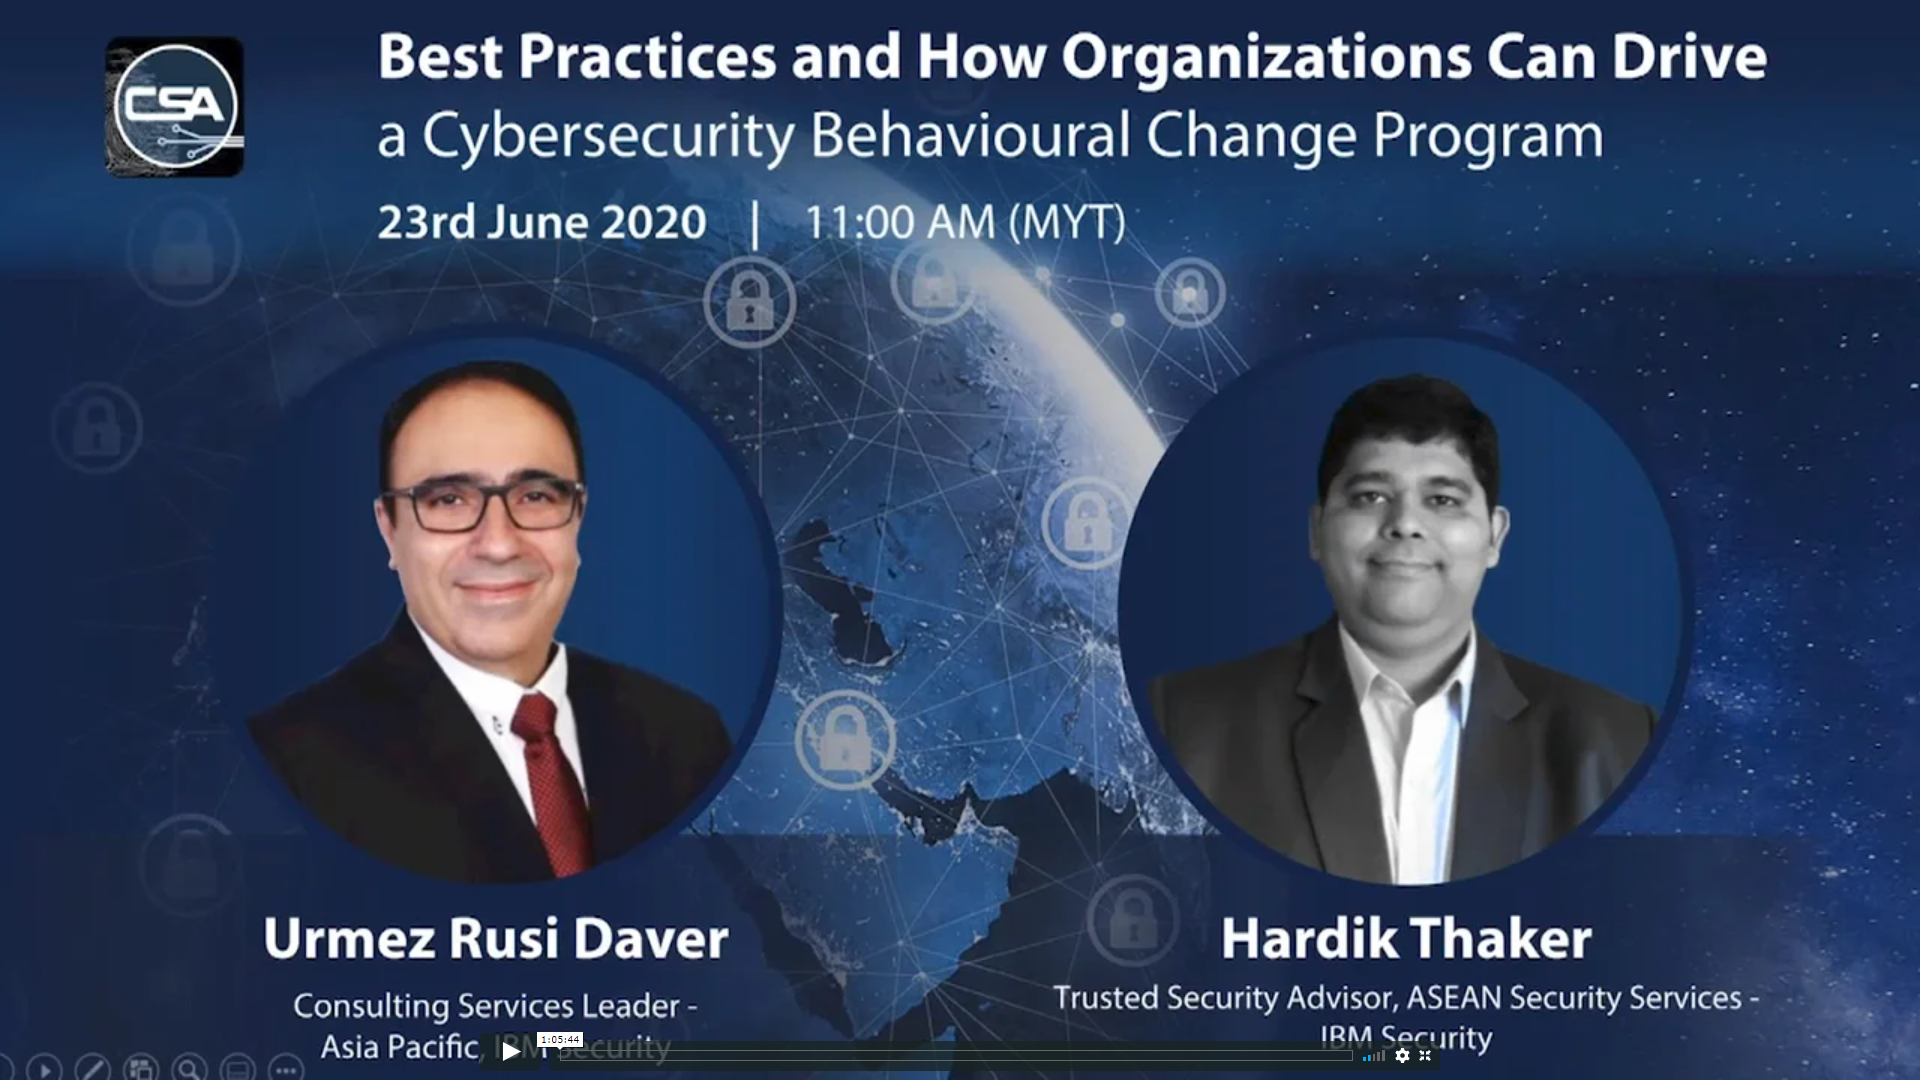 IBM Security Webinar - Best Practices & How Organizations Can Drive a Cybersecurity Behavioural Change Program - REGISTRATION.